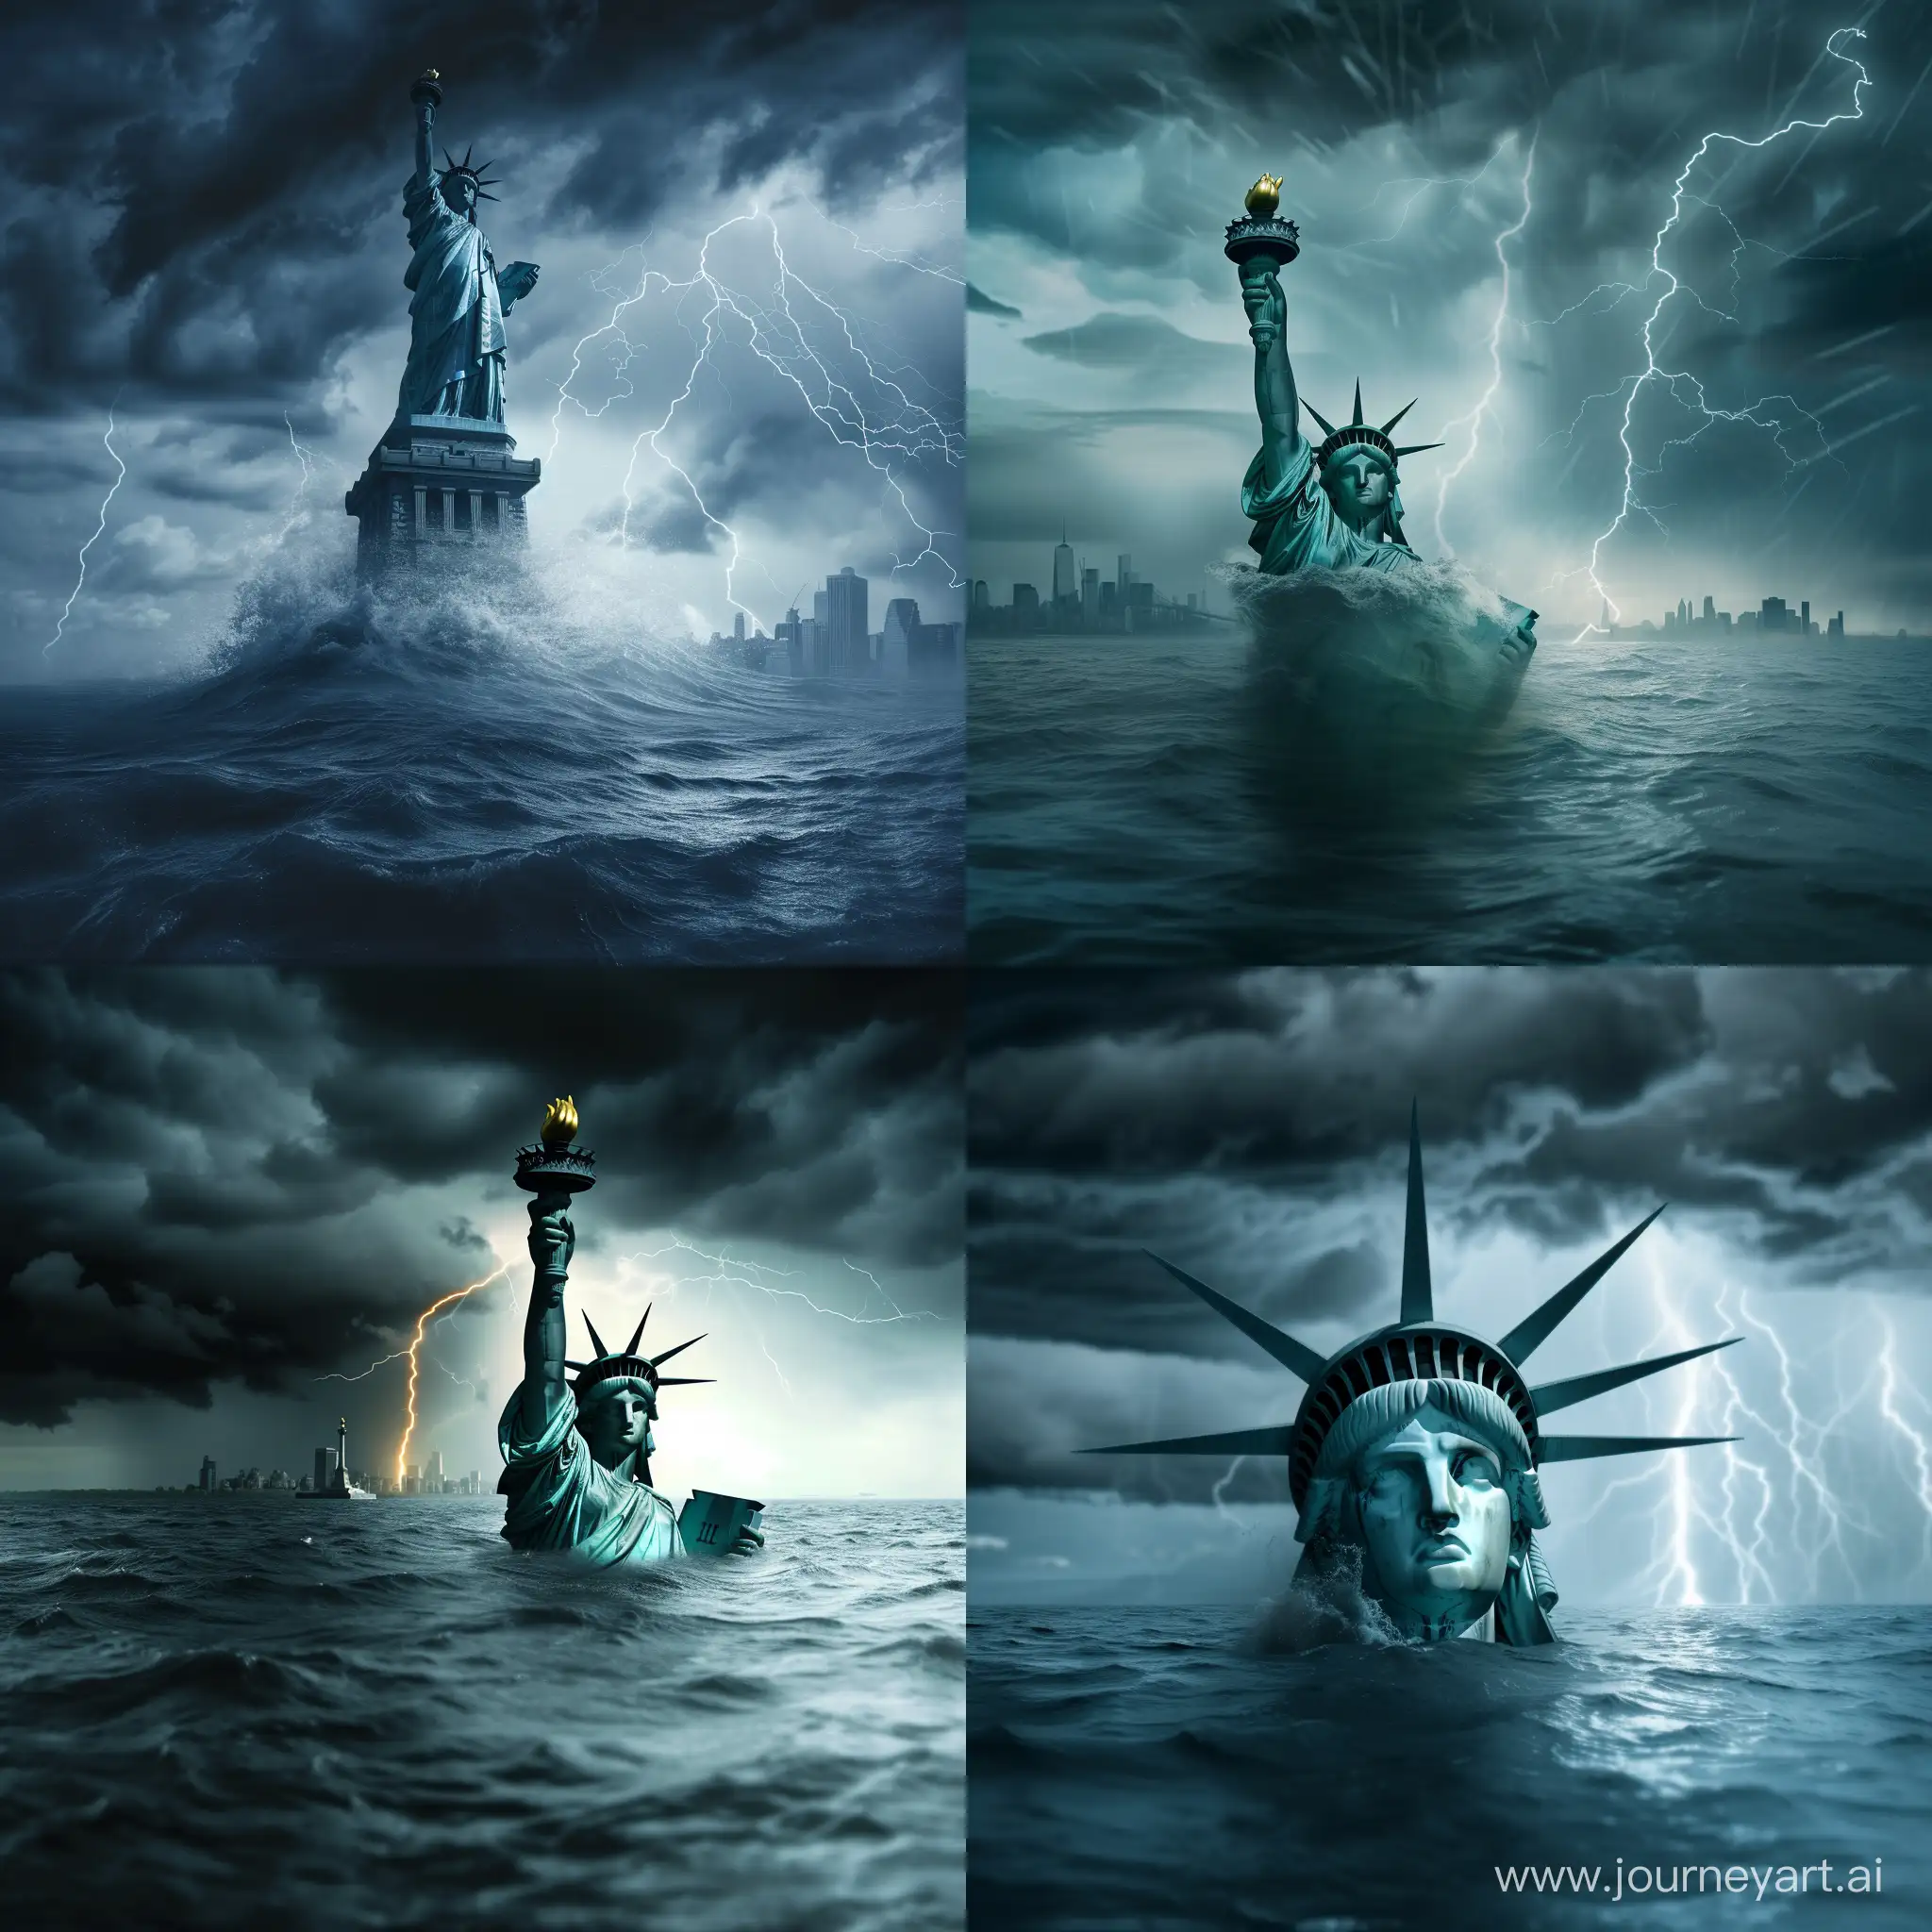 Dramatic-Underwater-Scene-Statue-of-Liberty-Emerges-Amidst-Storm-and-Lightning